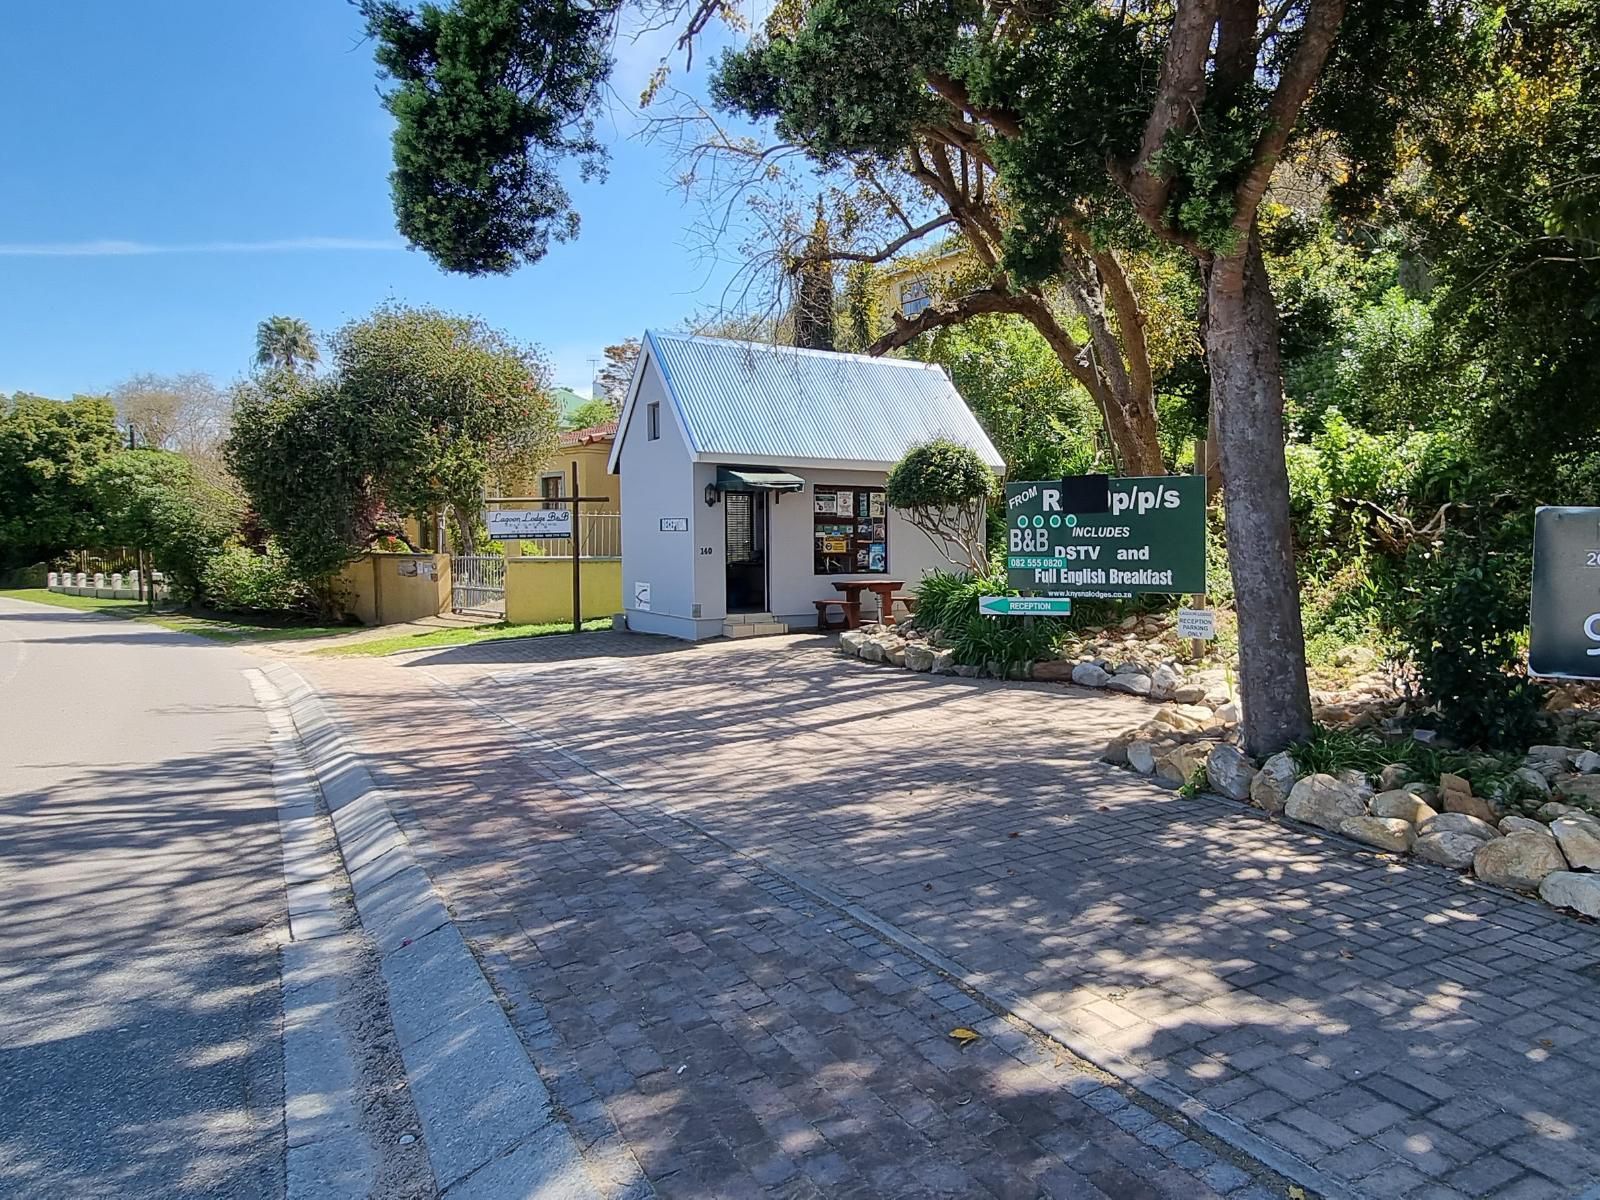 Lagoon Lodge Paradise Knysna Western Cape South Africa House, Building, Architecture, Sign